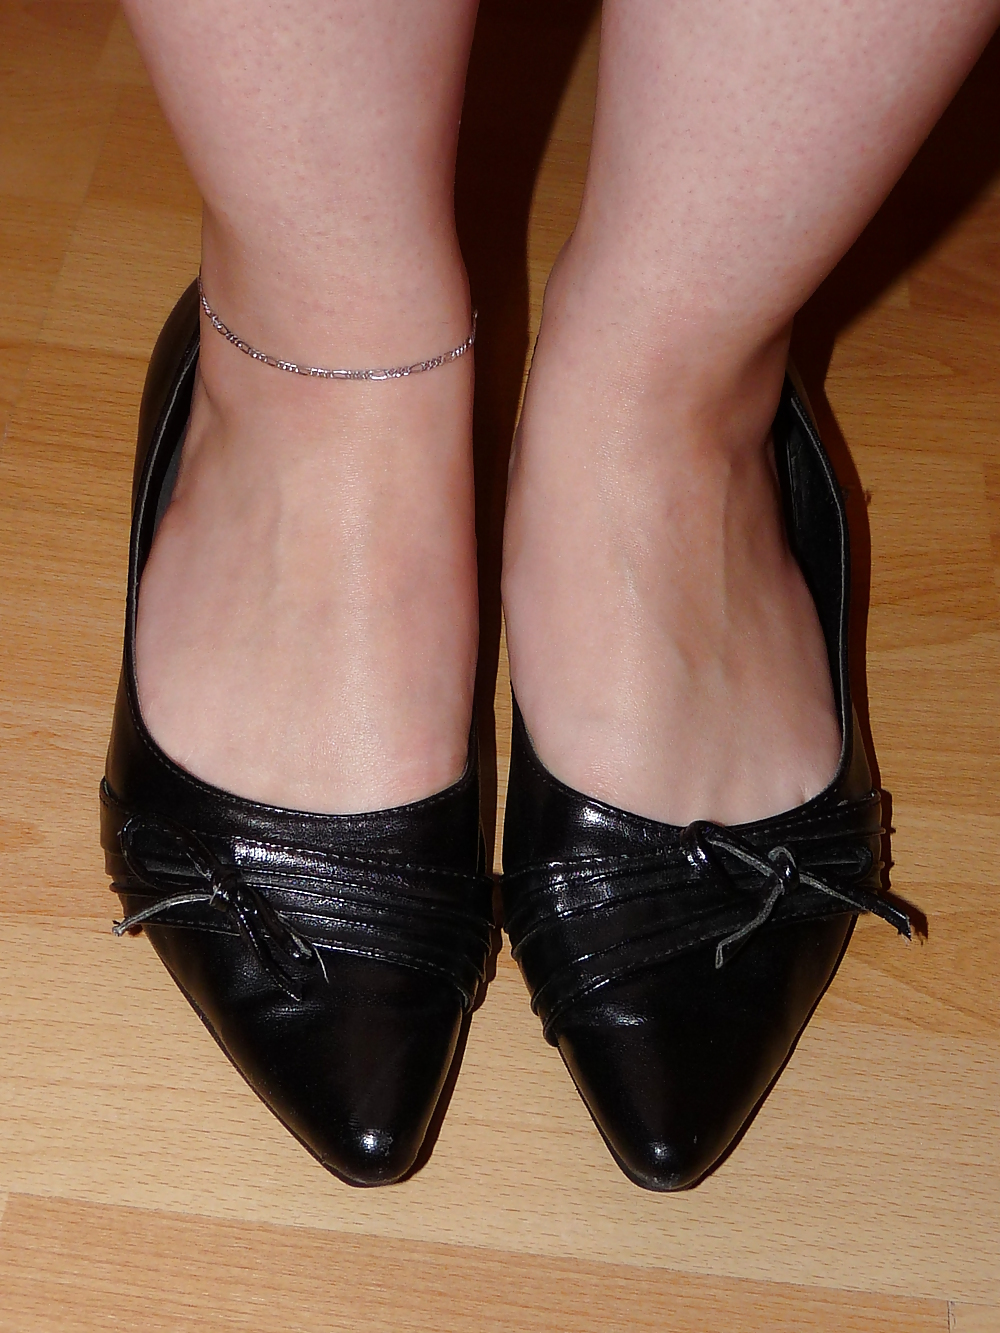 Wifes sexy black leather ballerina ballet flats shoes 2 #19330356